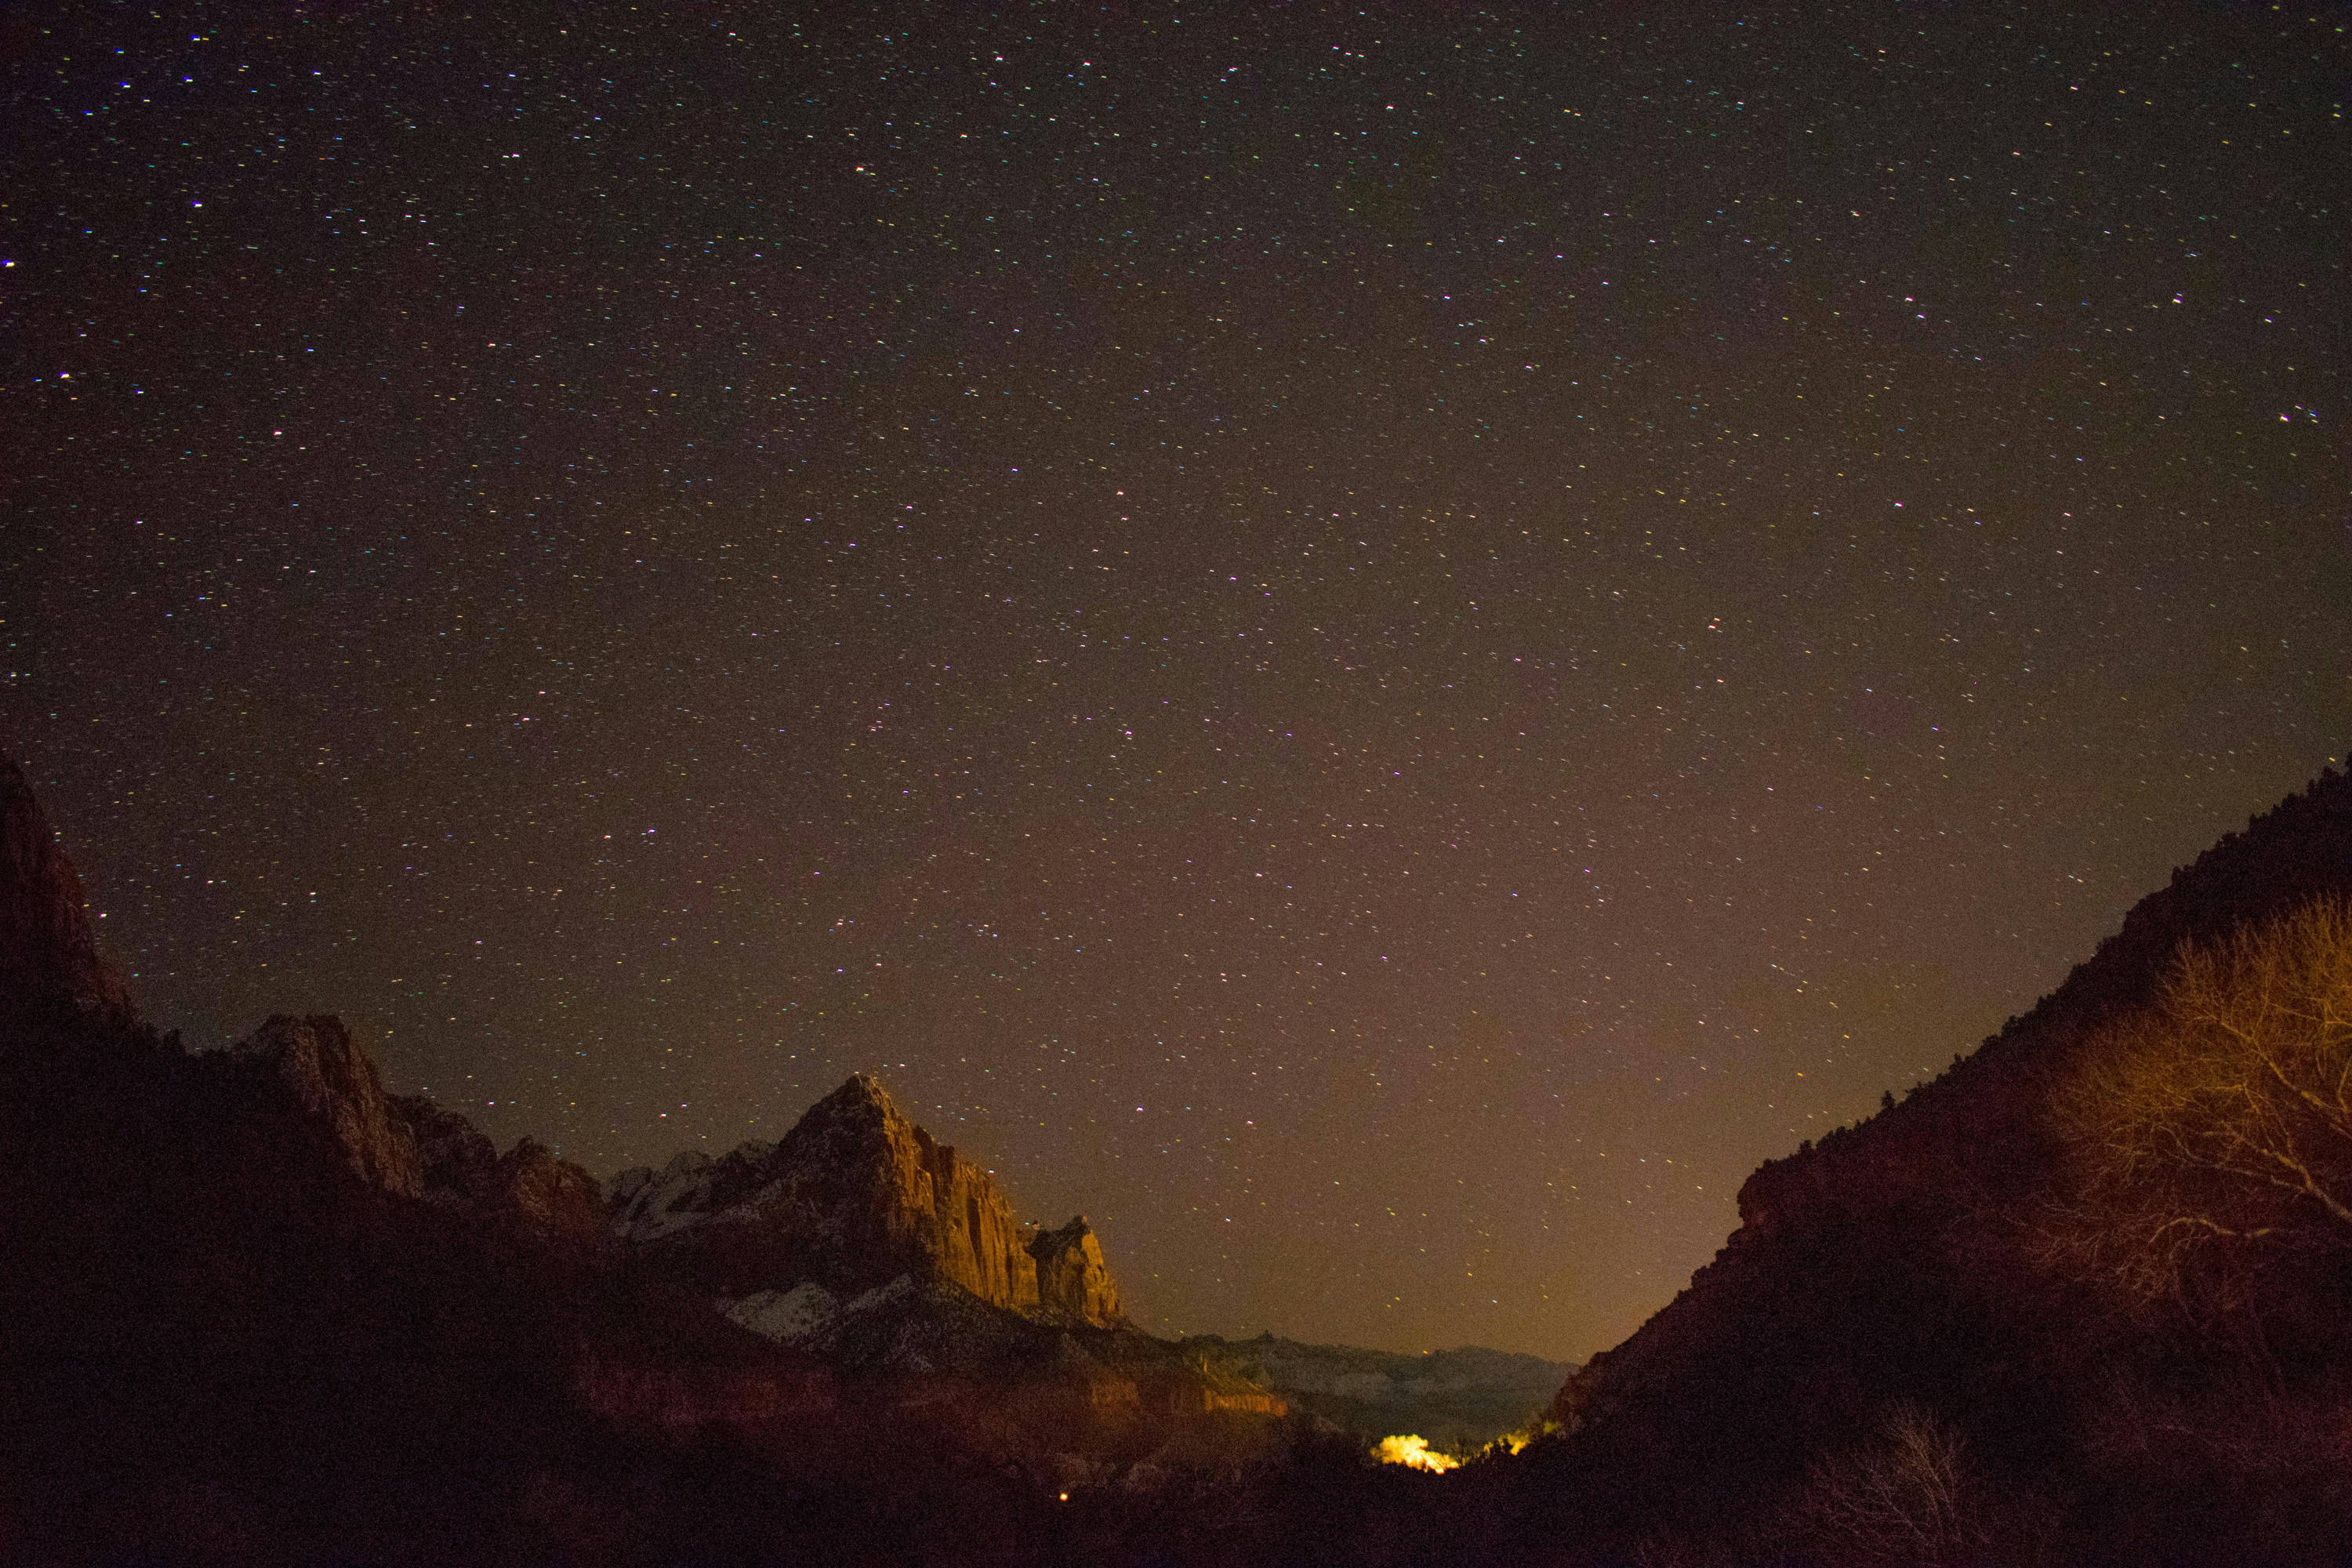 Zion National Park canyons and stars at night.